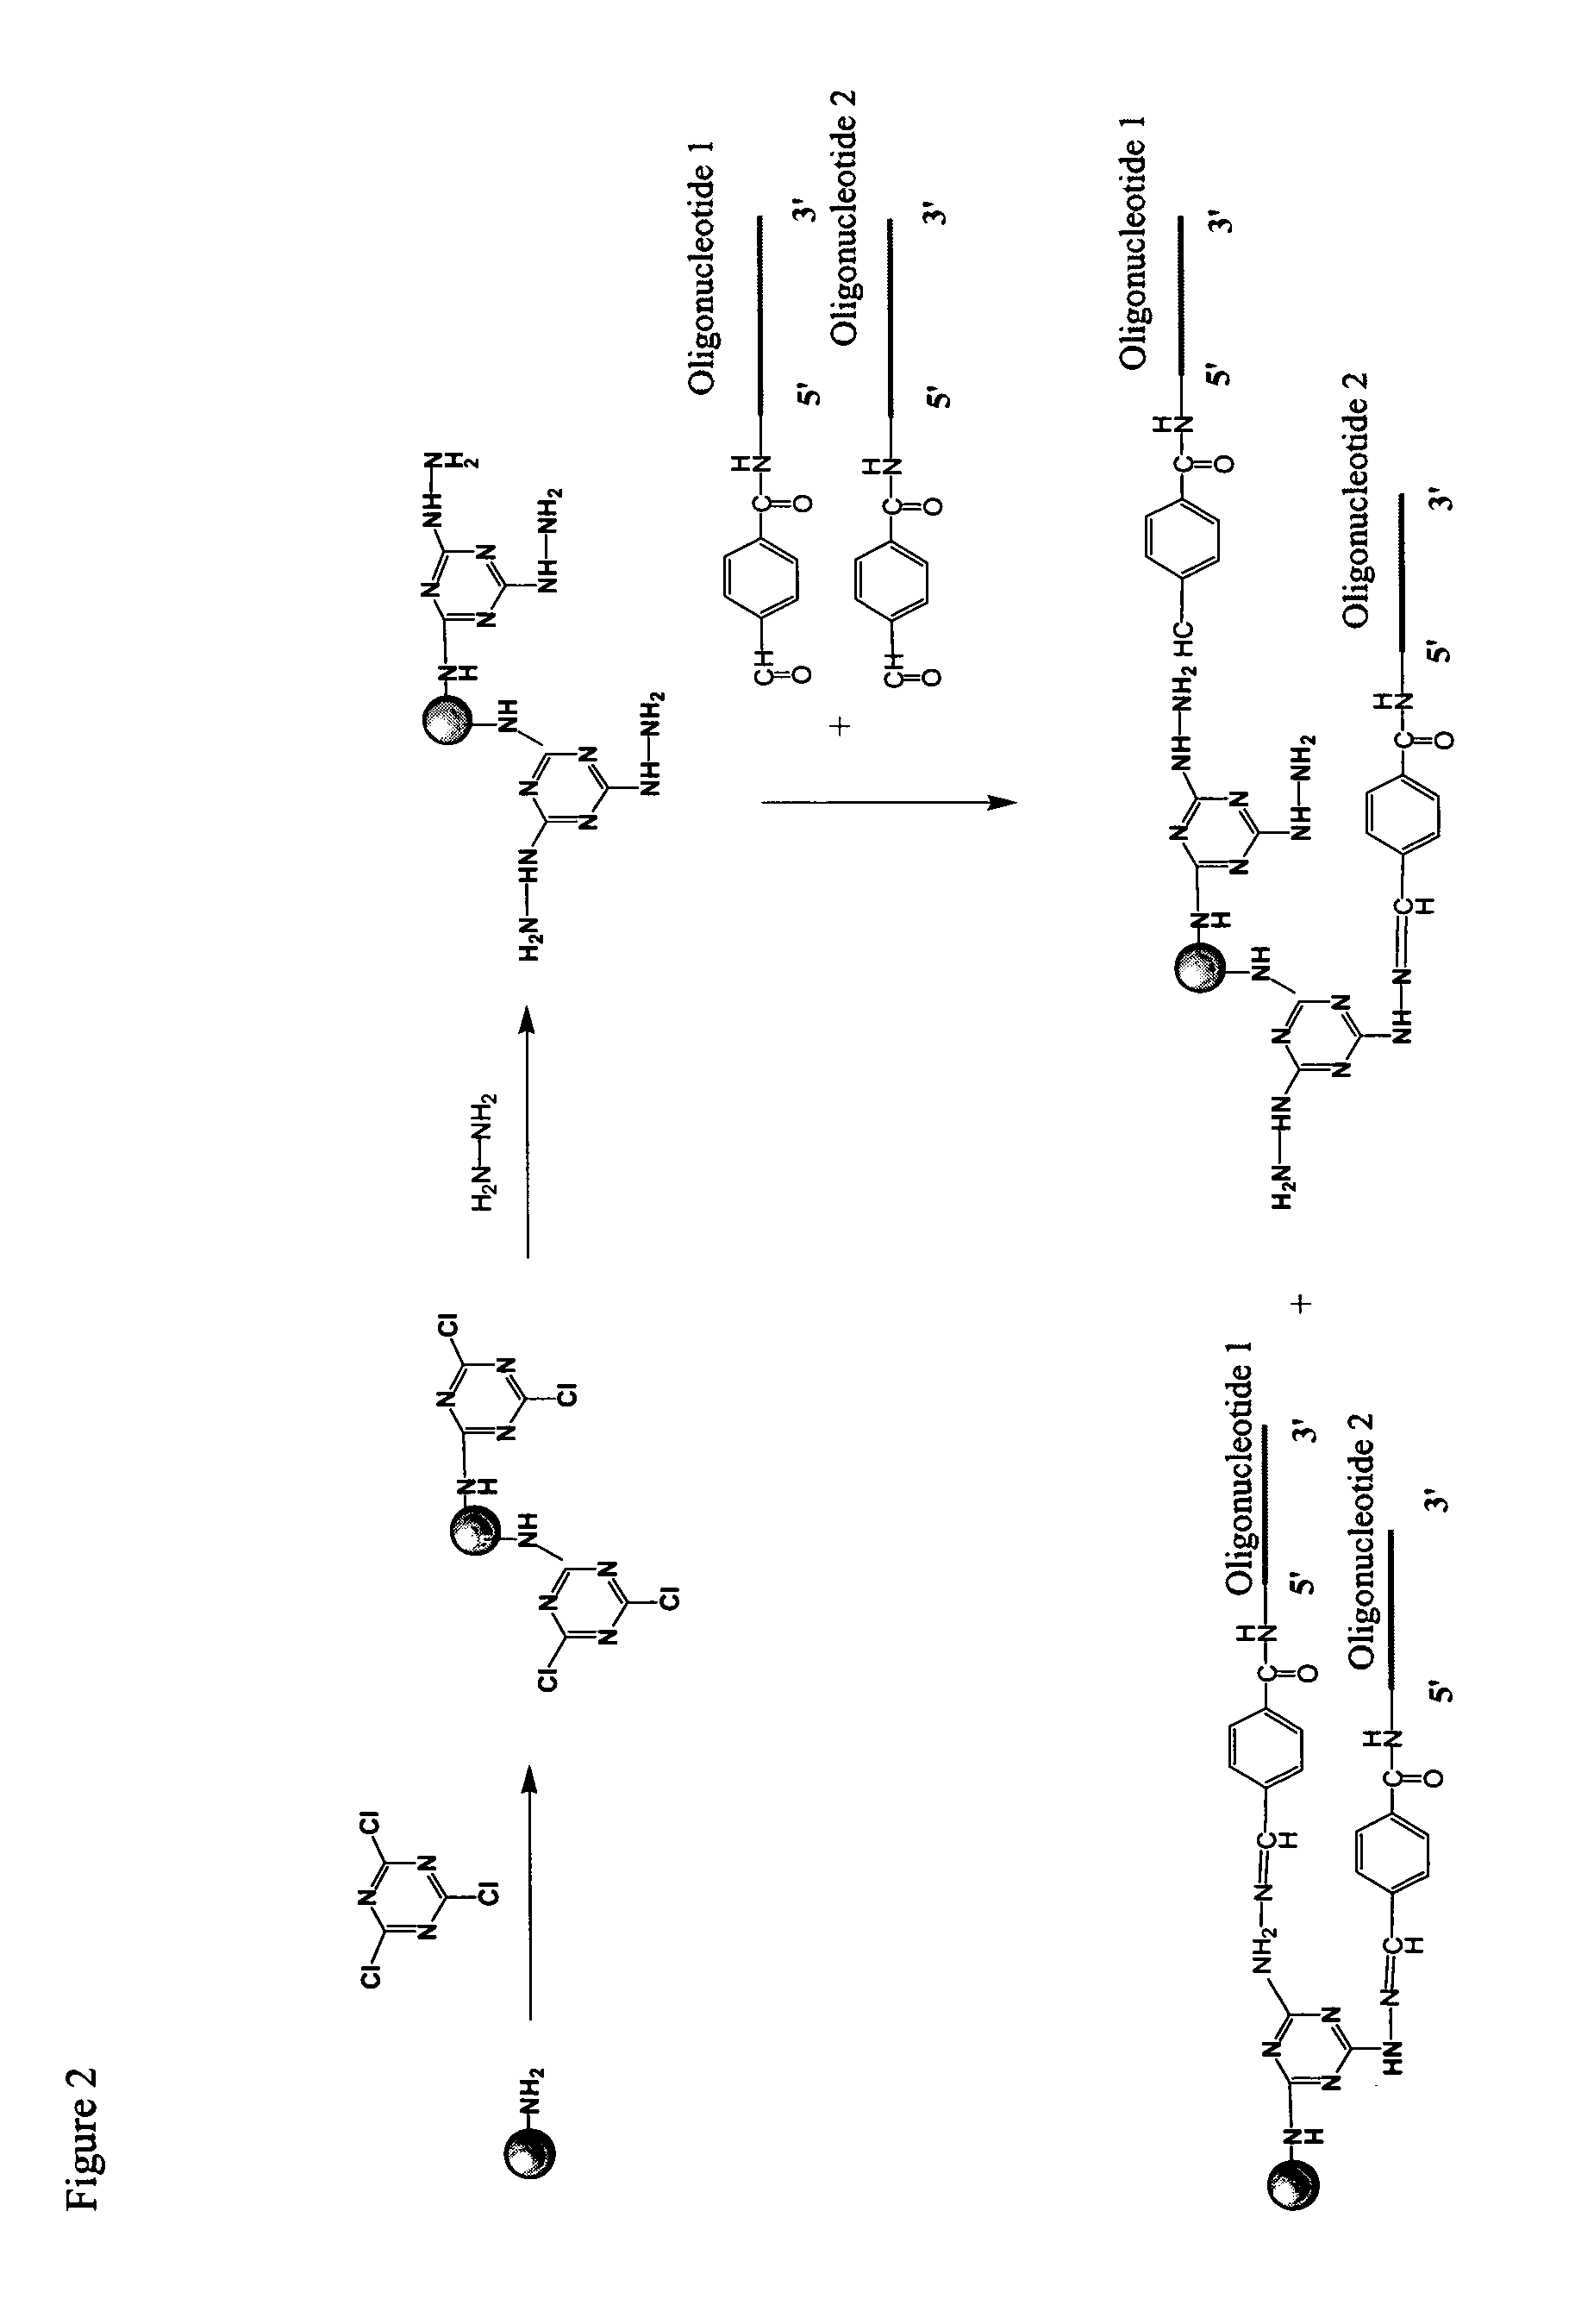 Methods of attaching biological compounds to solid supports using triazine